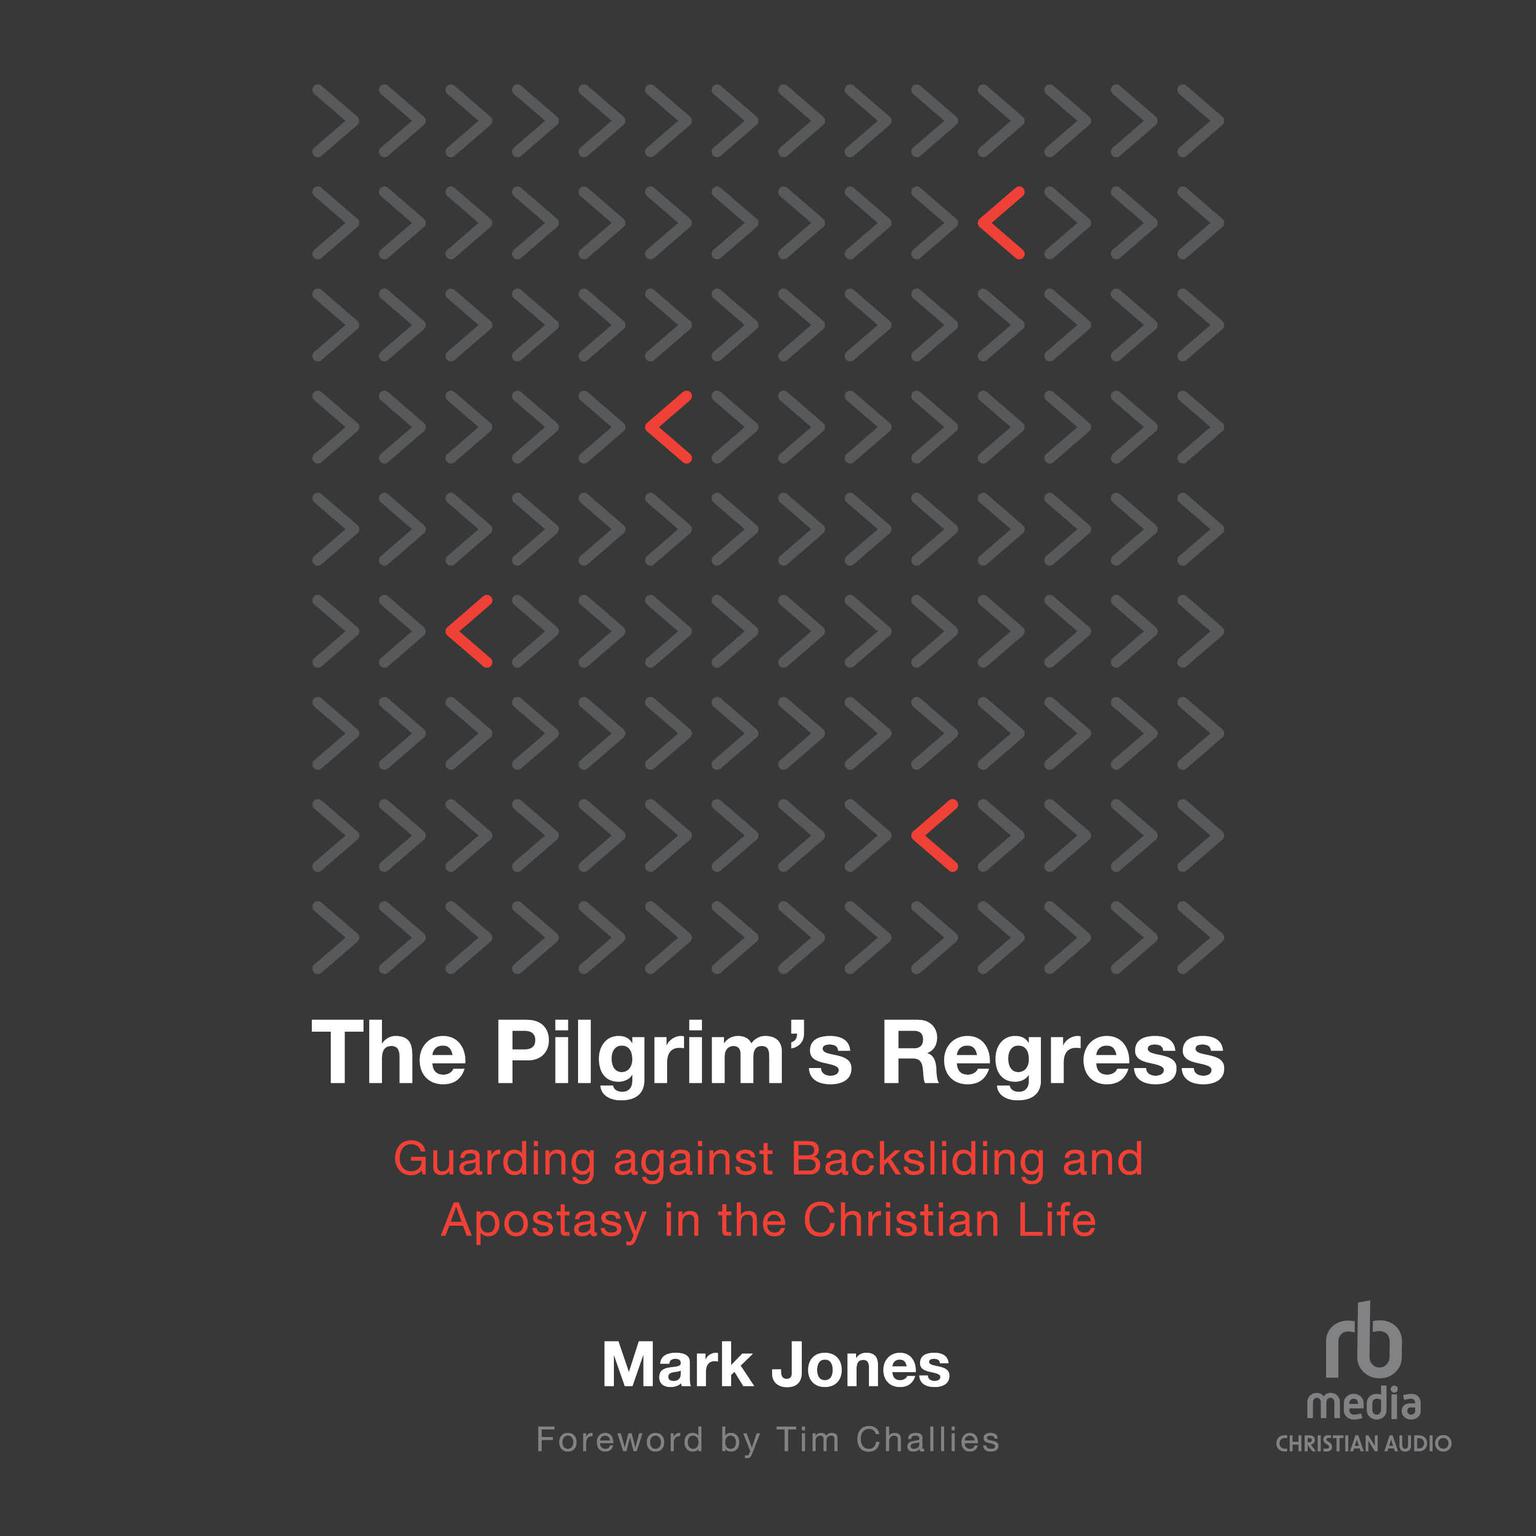 The Pilgrims Regress: Guarding Against Backsliding and Apostasy in the Christian Life Audiobook, by Mark Jones